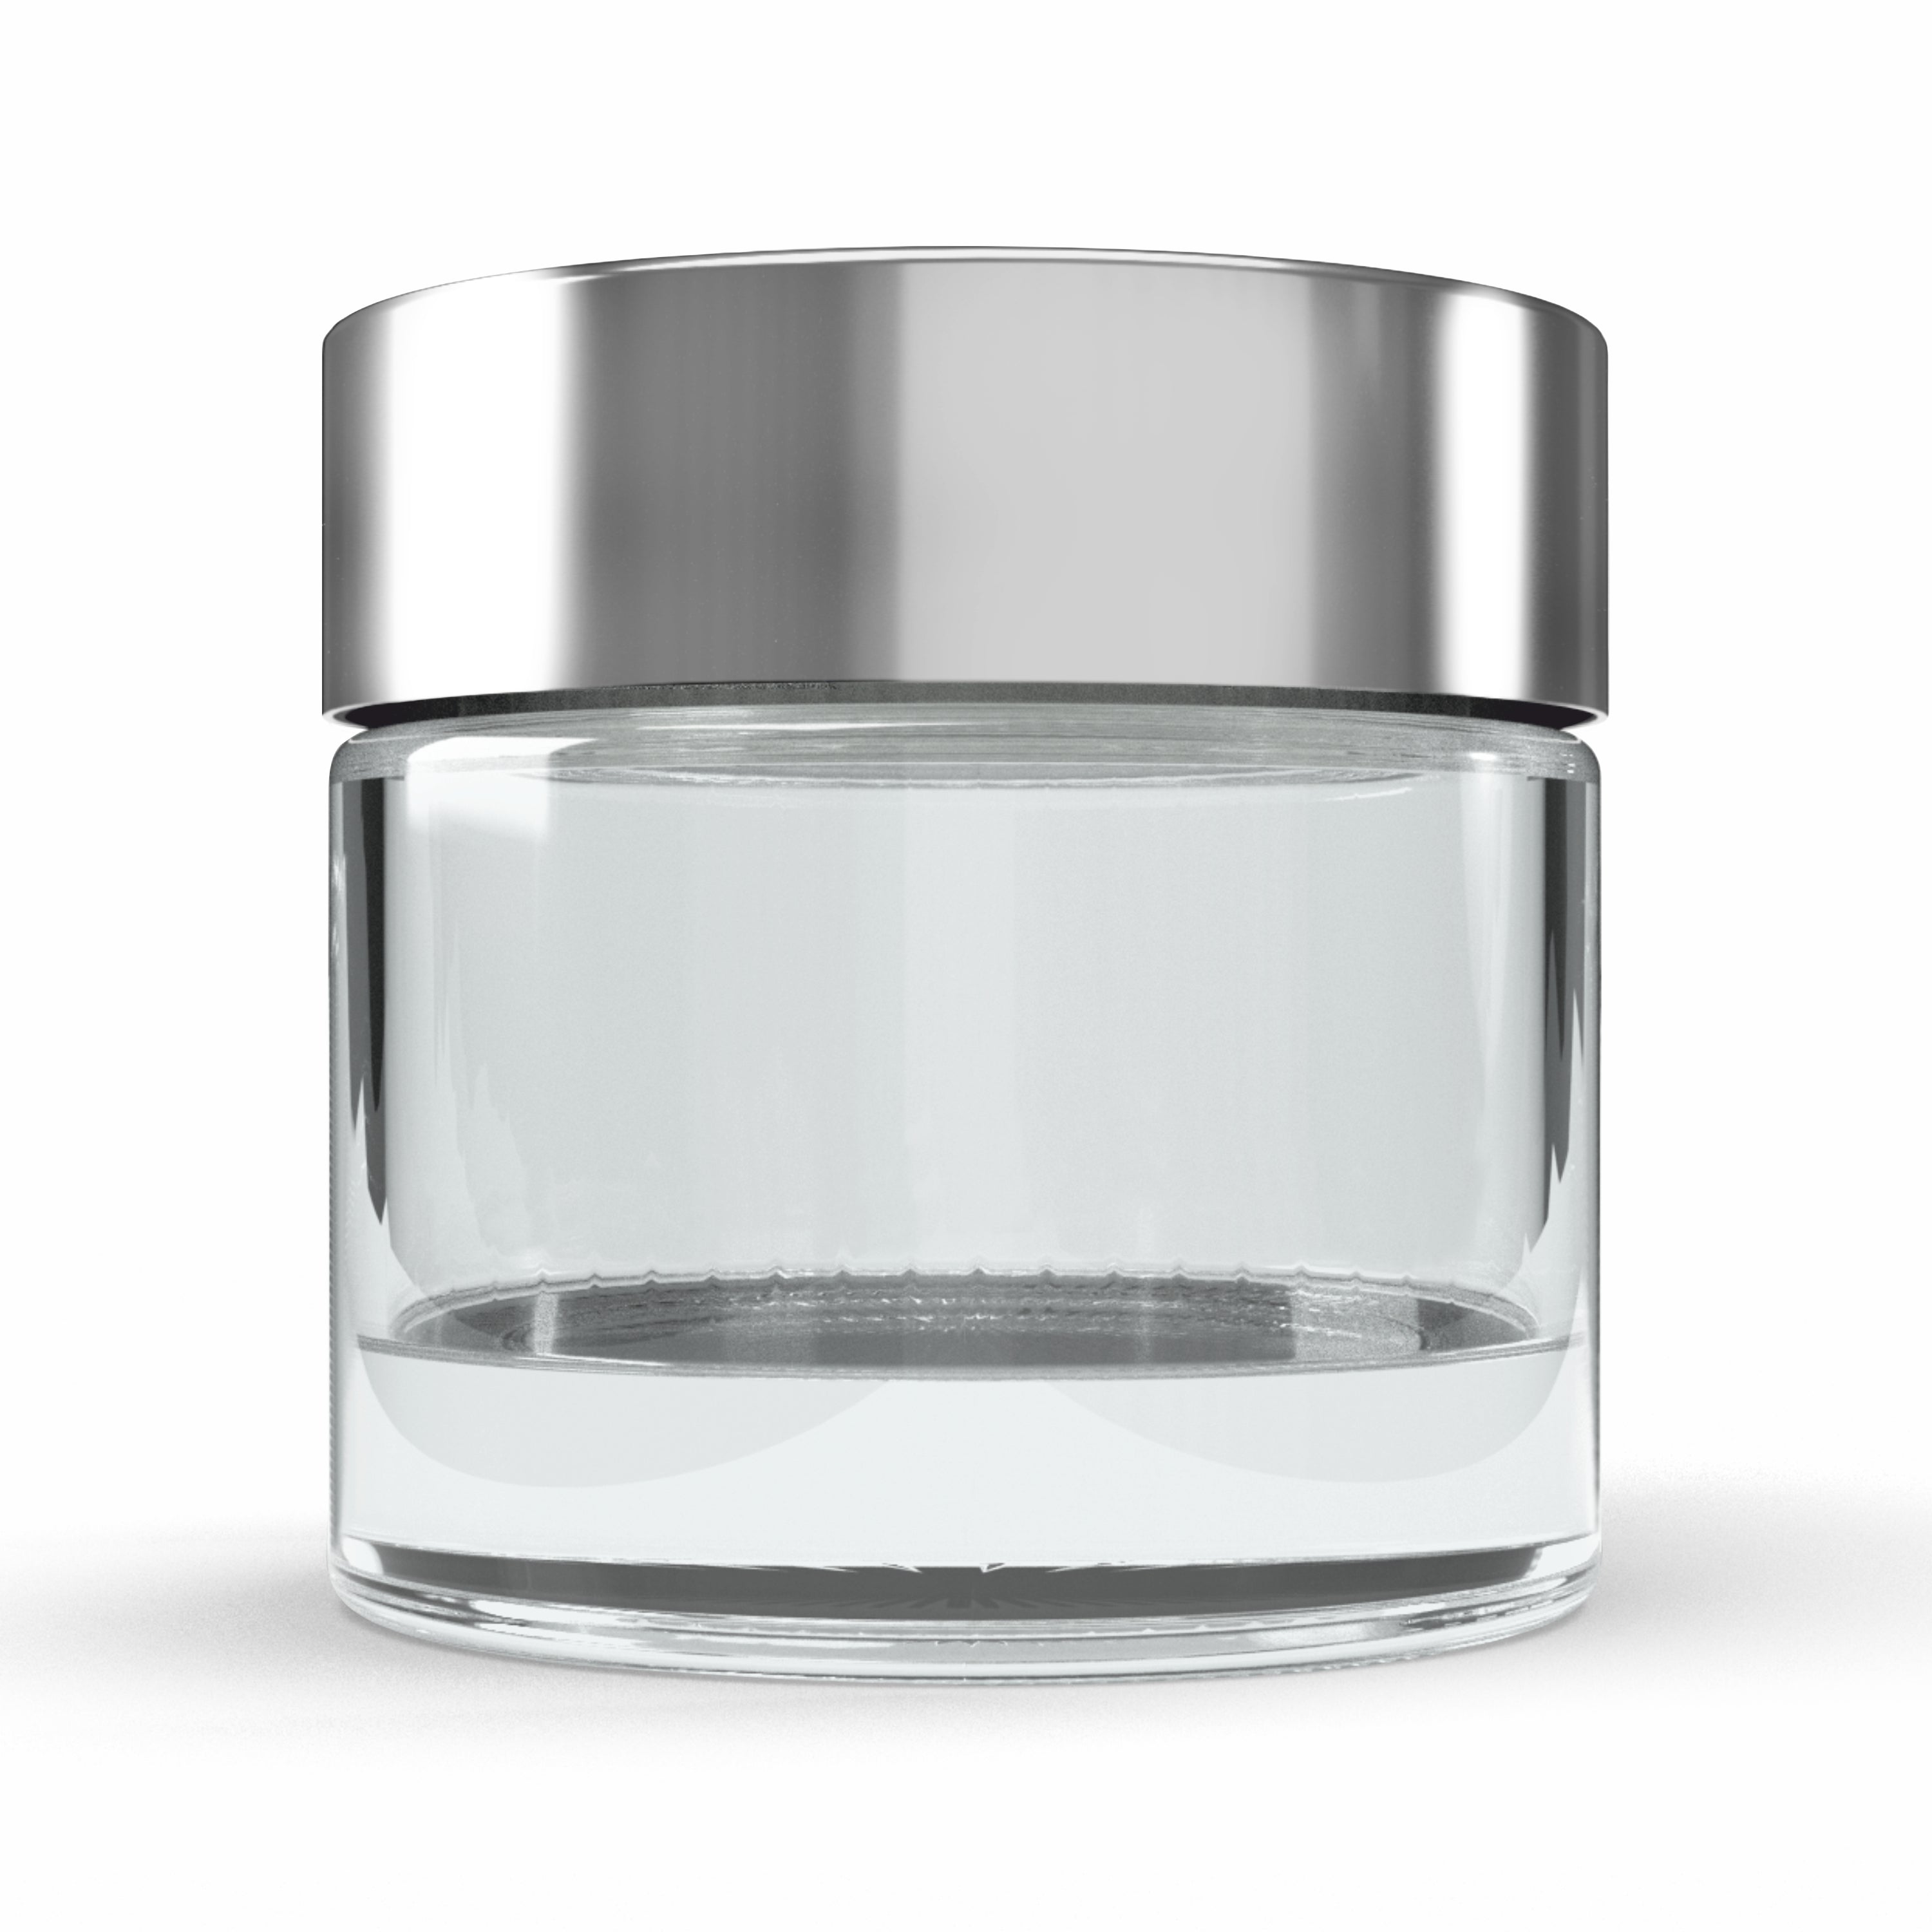 Empty Transparent Clear Glass Jar with Silver Plated Screw Cap- 10gm [ZMJ50]